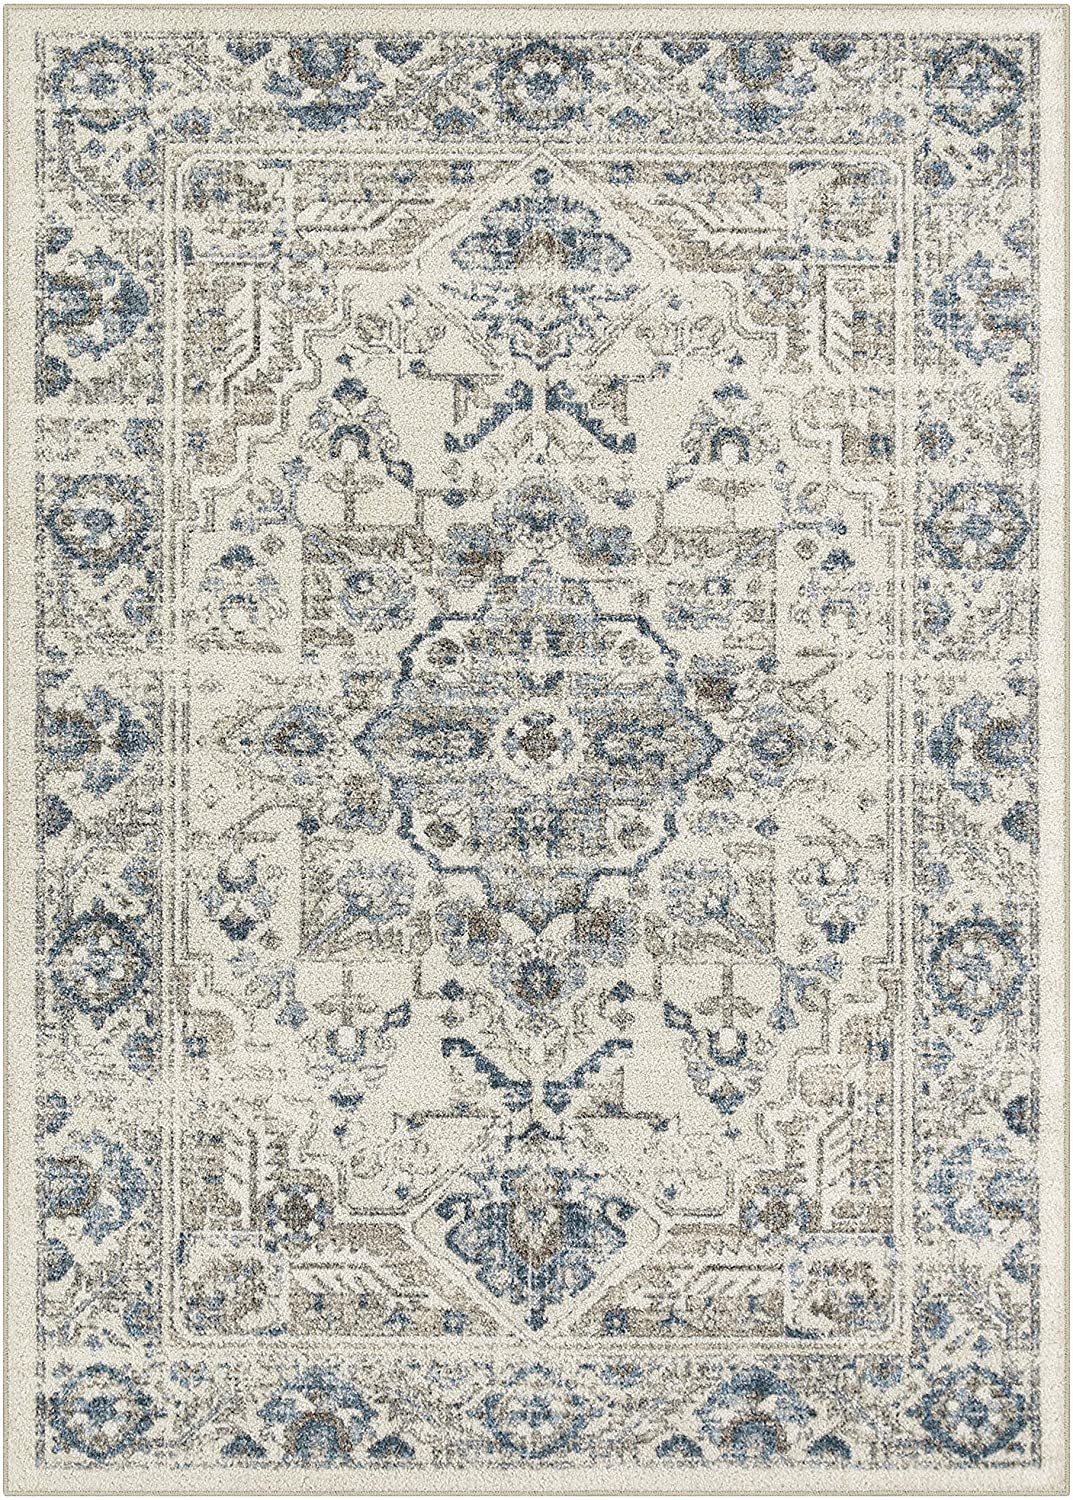 Maples Rugs Distressed Tapestry Vintage Non Slip Runner Rug For Hallway Entry Wa 